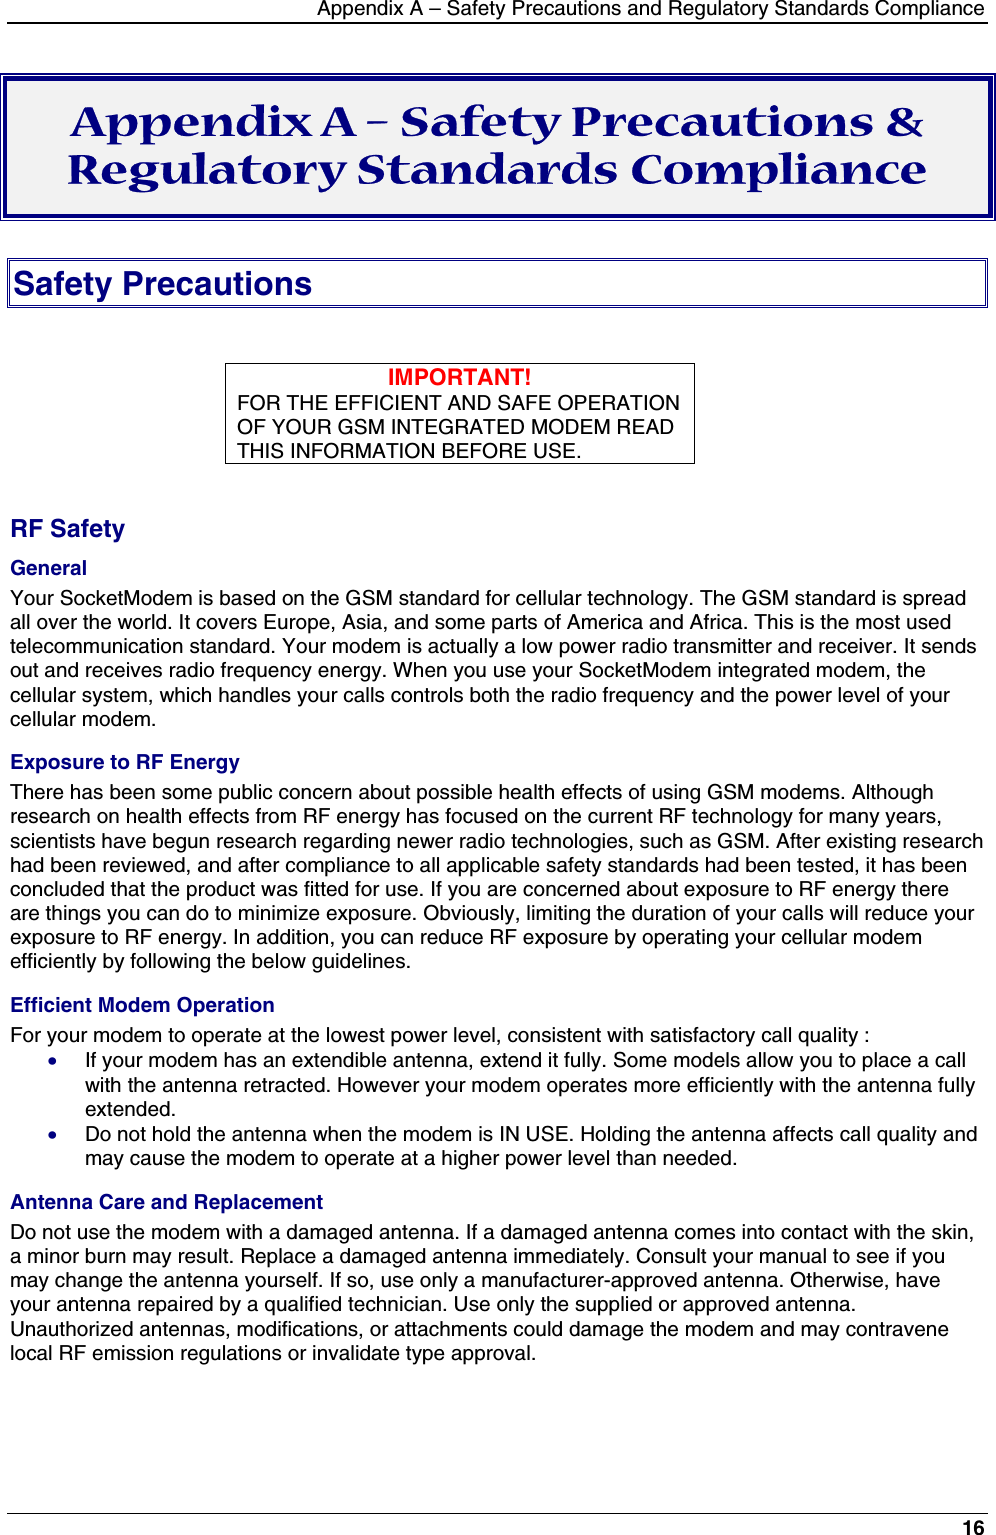 Appendix A – Safety Precautions and Regulatory Standards Compliance16Appendix A – Safety Precautions &amp;Regulatory Standards ComplianceSafety PrecautionsIMPORTANT!FOR THE EFFICIENT AND SAFE OPERATIONOF YOUR GSM INTEGRATED MODEM READTHIS INFORMATION BEFORE USE.RF SafetyGeneralYour SocketModem is based on the GSM standard for cellular technology. The GSM standard is spreadall over the world. It covers Europe, Asia, and some parts of America and Africa. This is the most usedtelecommunication standard. Your modem is actually a low power radio transmitter and receiver. It sendsout and receives radio frequency energy. When you use your SocketModem integrated modem, thecellular system, which handles your calls controls both the radio frequency and the power level of yourcellular modem.Exposure to RF EnergyThere has been some public concern about possible health effects of using GSM modems. Althoughresearch on health effects from RF energy has focused on the current RF technology for many years,scientists have begun research regarding newer radio technologies, such as GSM. After existing researchhad been reviewed, and after compliance to all applicable safety standards had been tested, it has beenconcluded that the product was fitted for use. If you are concerned about exposure to RF energy thereare things you can do to minimize exposure. Obviously, limiting the duration of your calls will reduce yourexposure to RF energy. In addition, you can reduce RF exposure by operating your cellular modemefficiently by following the below guidelines.Efficient Modem OperationFor your modem to operate at the lowest power level, consistent with satisfactory call quality :· If your modem has an extendible antenna, extend it fully. Some models allow you to place a callwith the antenna retracted. However your modem operates more efficiently with the antenna fullyextended.· Do not hold the antenna when the modem is IN USE. Holding the antenna affects call quality andmay cause the modem to operate at a higher power level than needed.Antenna Care and ReplacementDo not use the modem with a damaged antenna. If a damaged antenna comes into contact with the skin,a minor burn may result. Replace a damaged antenna immediately. Consult your manual to see if youmay change the antenna yourself. If so, use only a manufacturer-approved antenna. Otherwise, haveyour antenna repaired by a qualified technician. Use only the supplied or approved antenna.Unauthorized antennas, modifications, or attachments could damage the modem and may contravenelocal RF emission regulations or invalidate type approval.